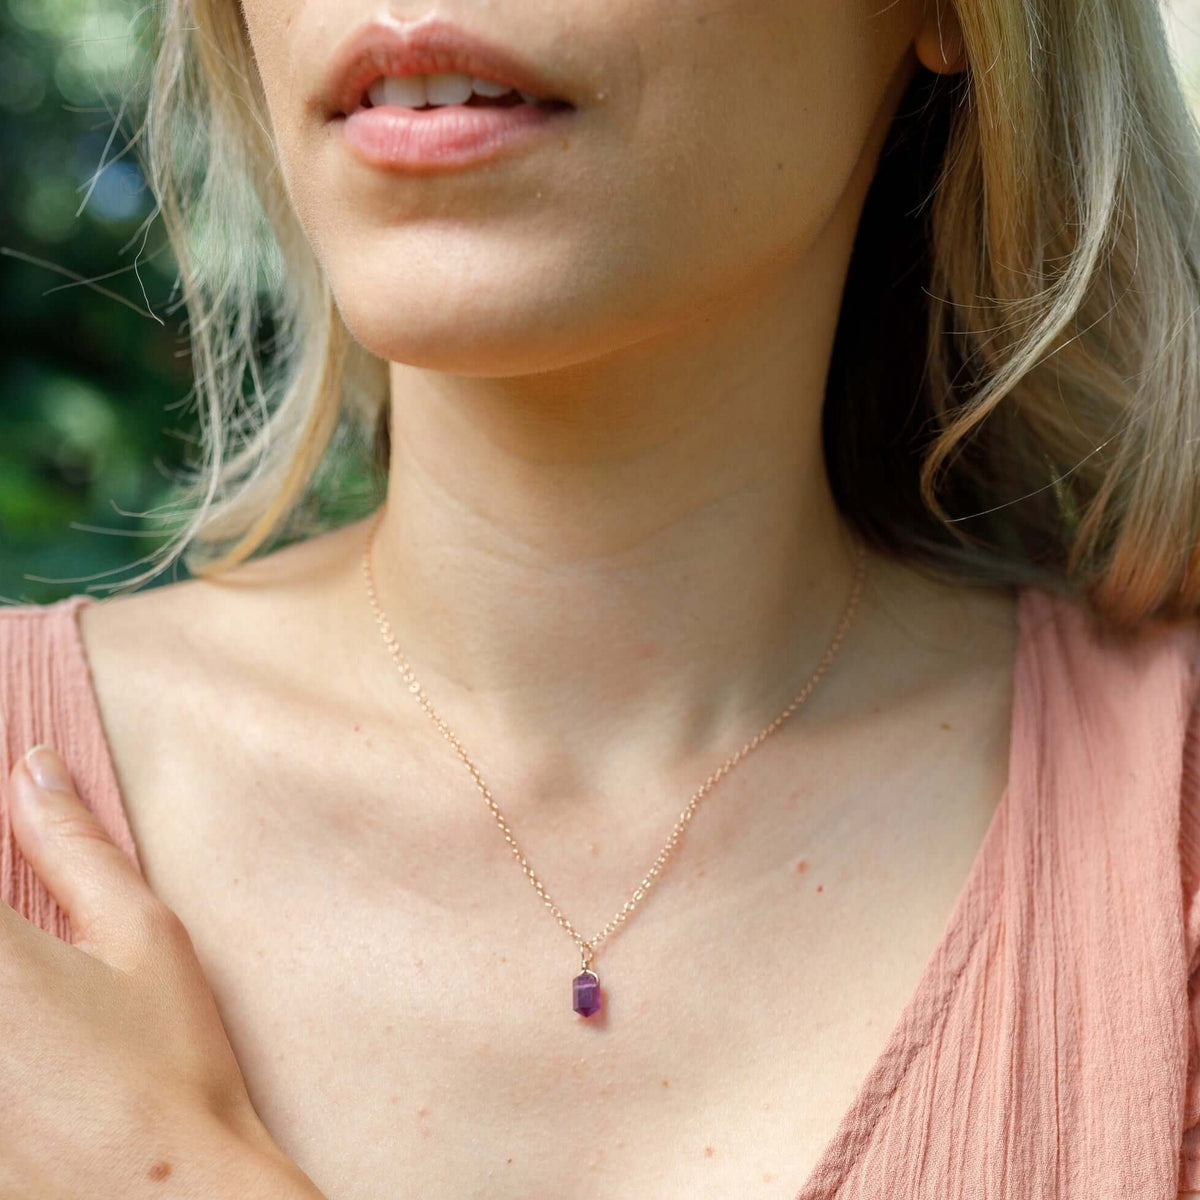 Double Terminated Crystal Pendant Necklace - Amethyst - 14K Rose Gold Fill - Luna Tide Handmade Jewellery